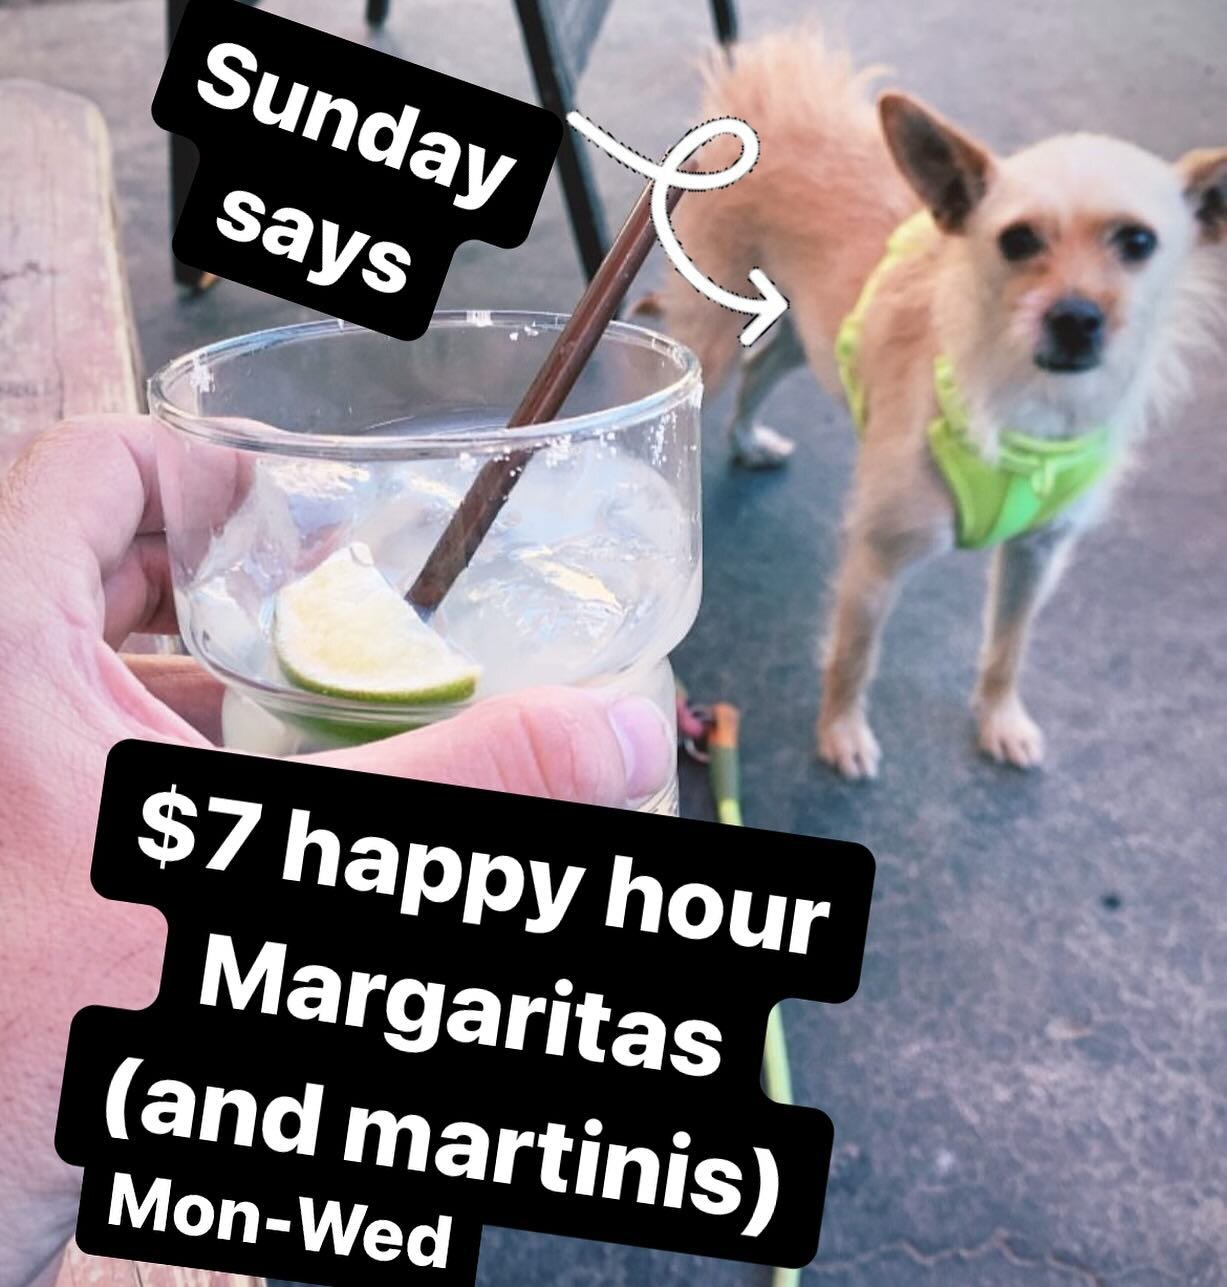 HAPPY HOUR!! 5 days a week. $7 margaritas and vodka or gin martinis! Plus a burger + pint of beer for $15!  Follow this cute dog to our sunny backyard and enjoy a cocktail with us!